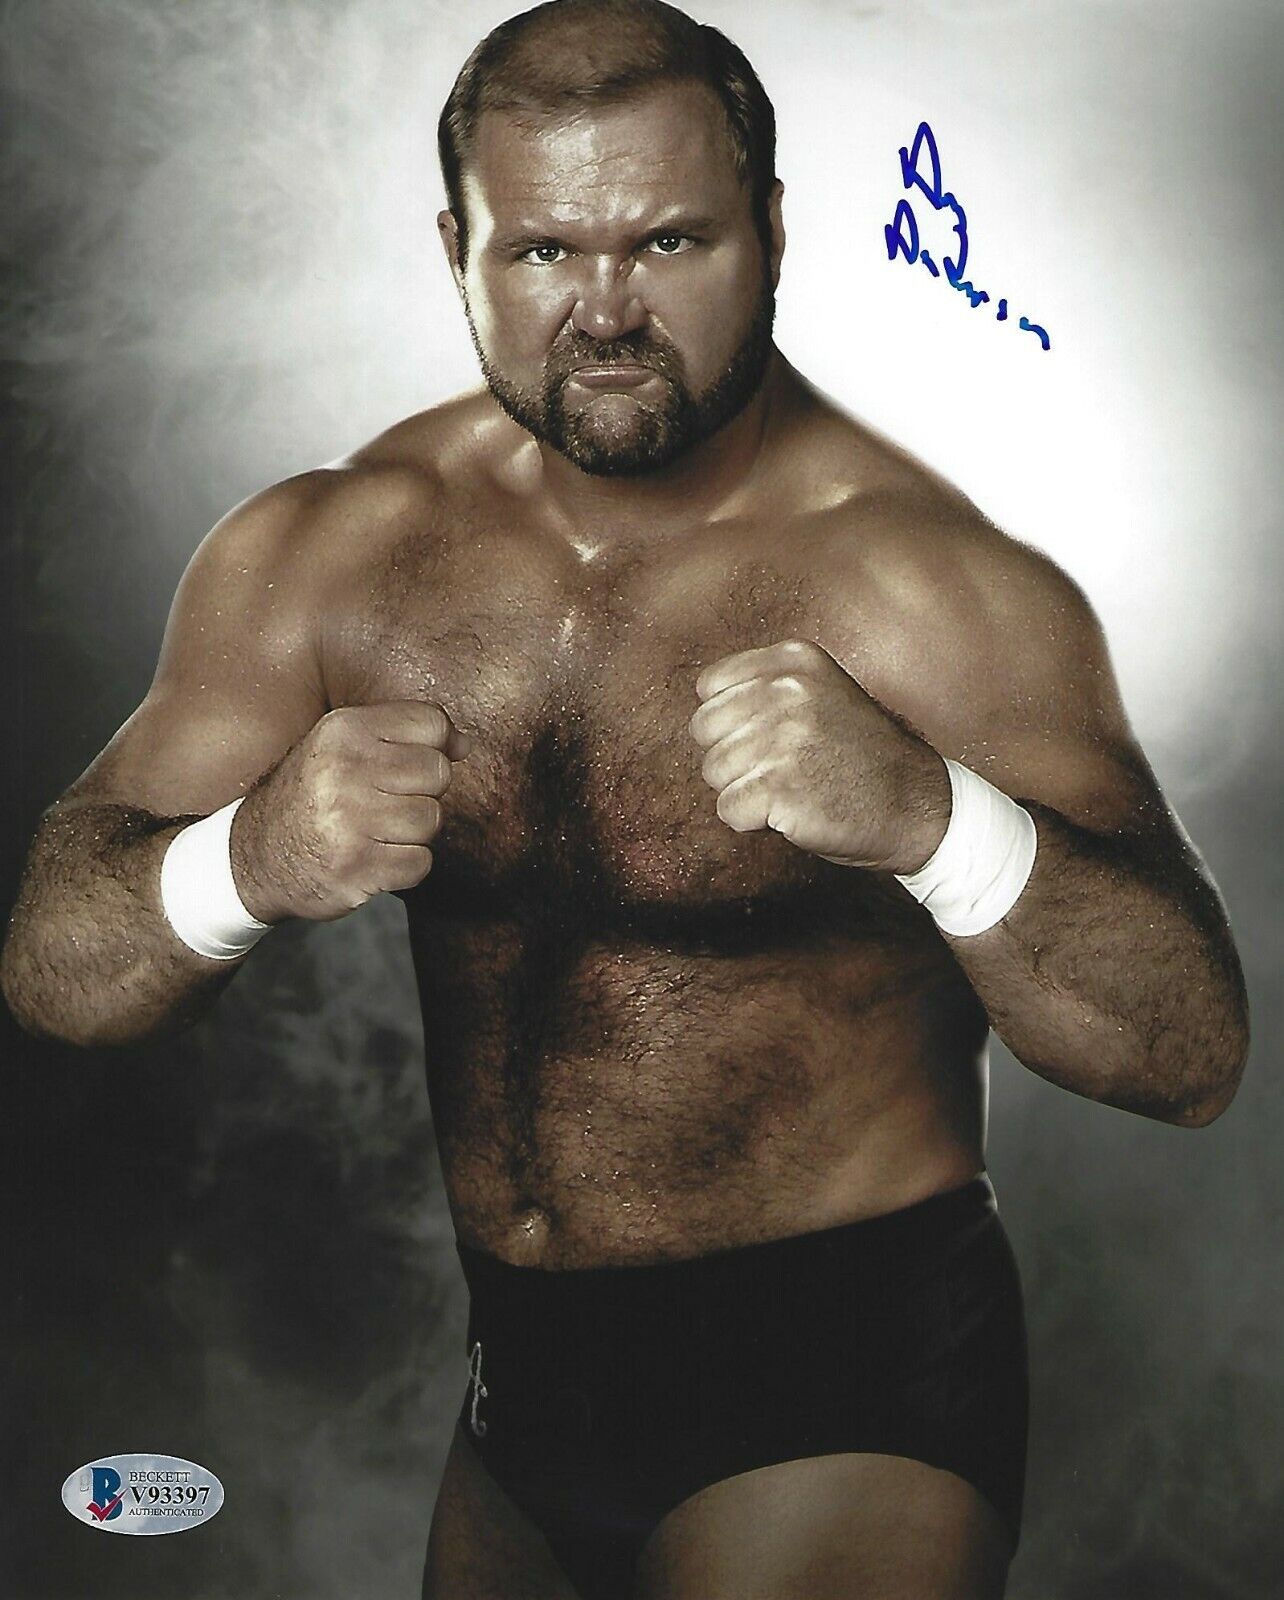 Arn Anderson Signed WWE 8x10 Photo Poster painting BAS COA AEW WCW 4 Horsemen Picture Autograph